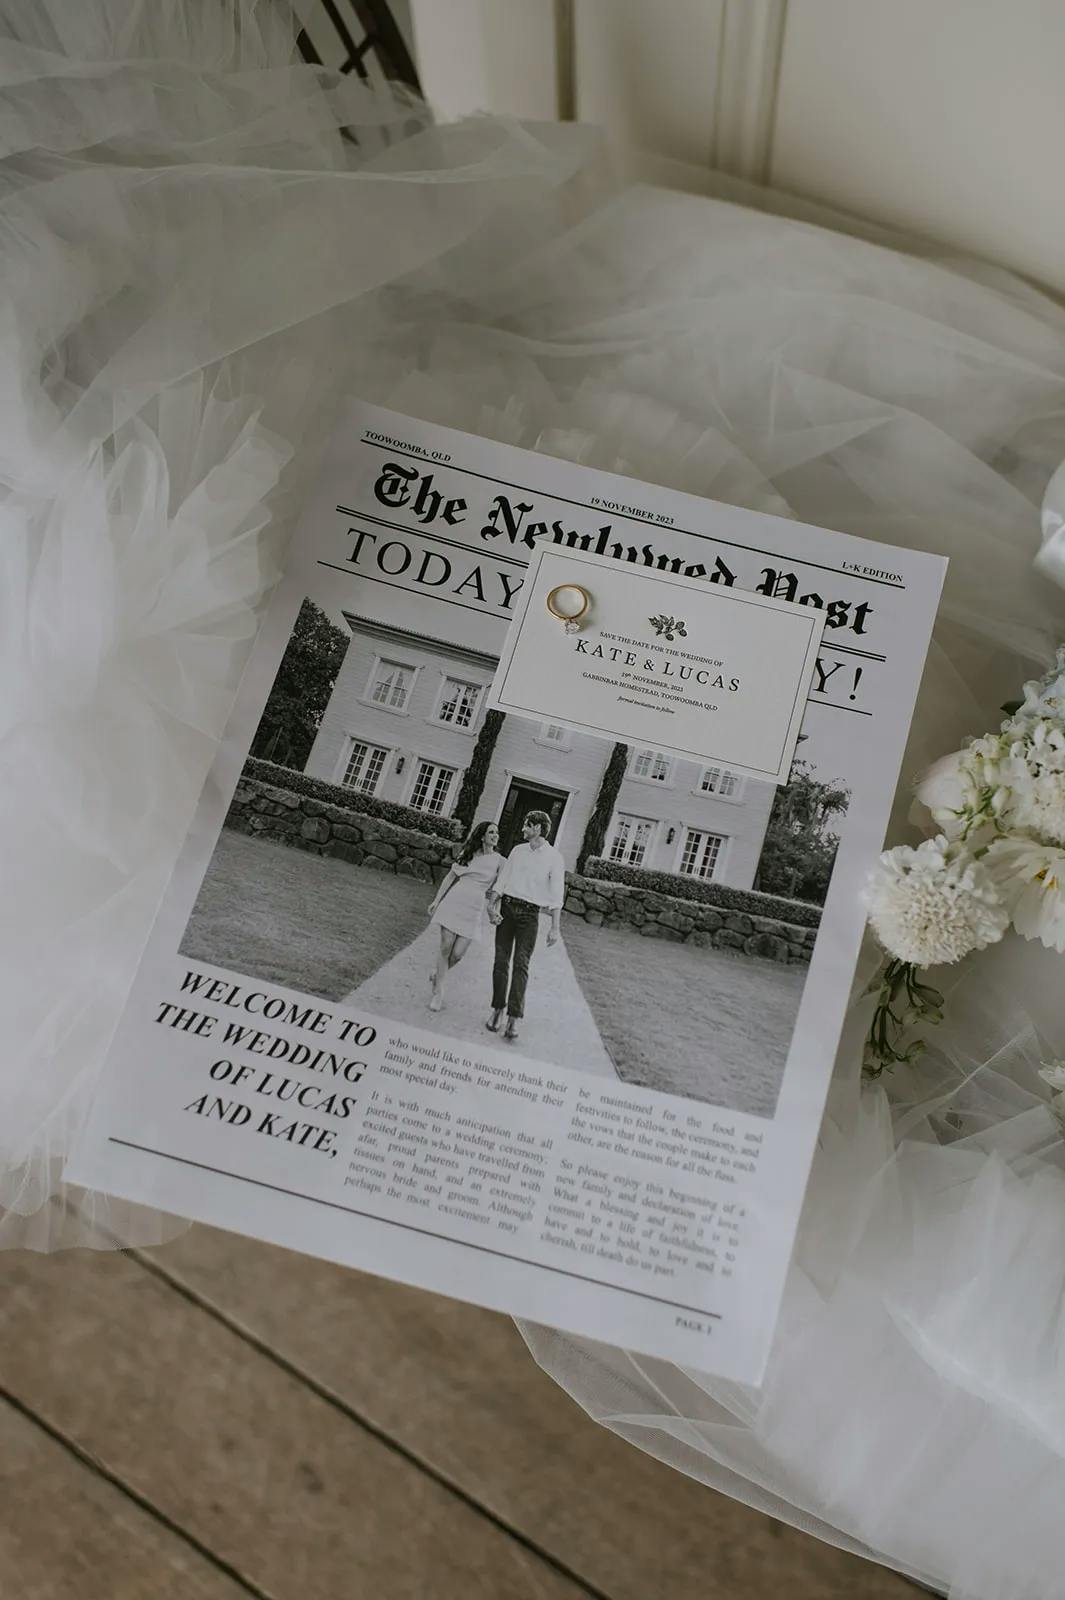 A wedding program styled as a newspaper titled "The Newlywed Post" rests on a veil beside white flowers. The cover features a black-and-white photo of a couple holding hands in front of a house. The headline reads "Welcome to the Wedding of Lucas and Kate.